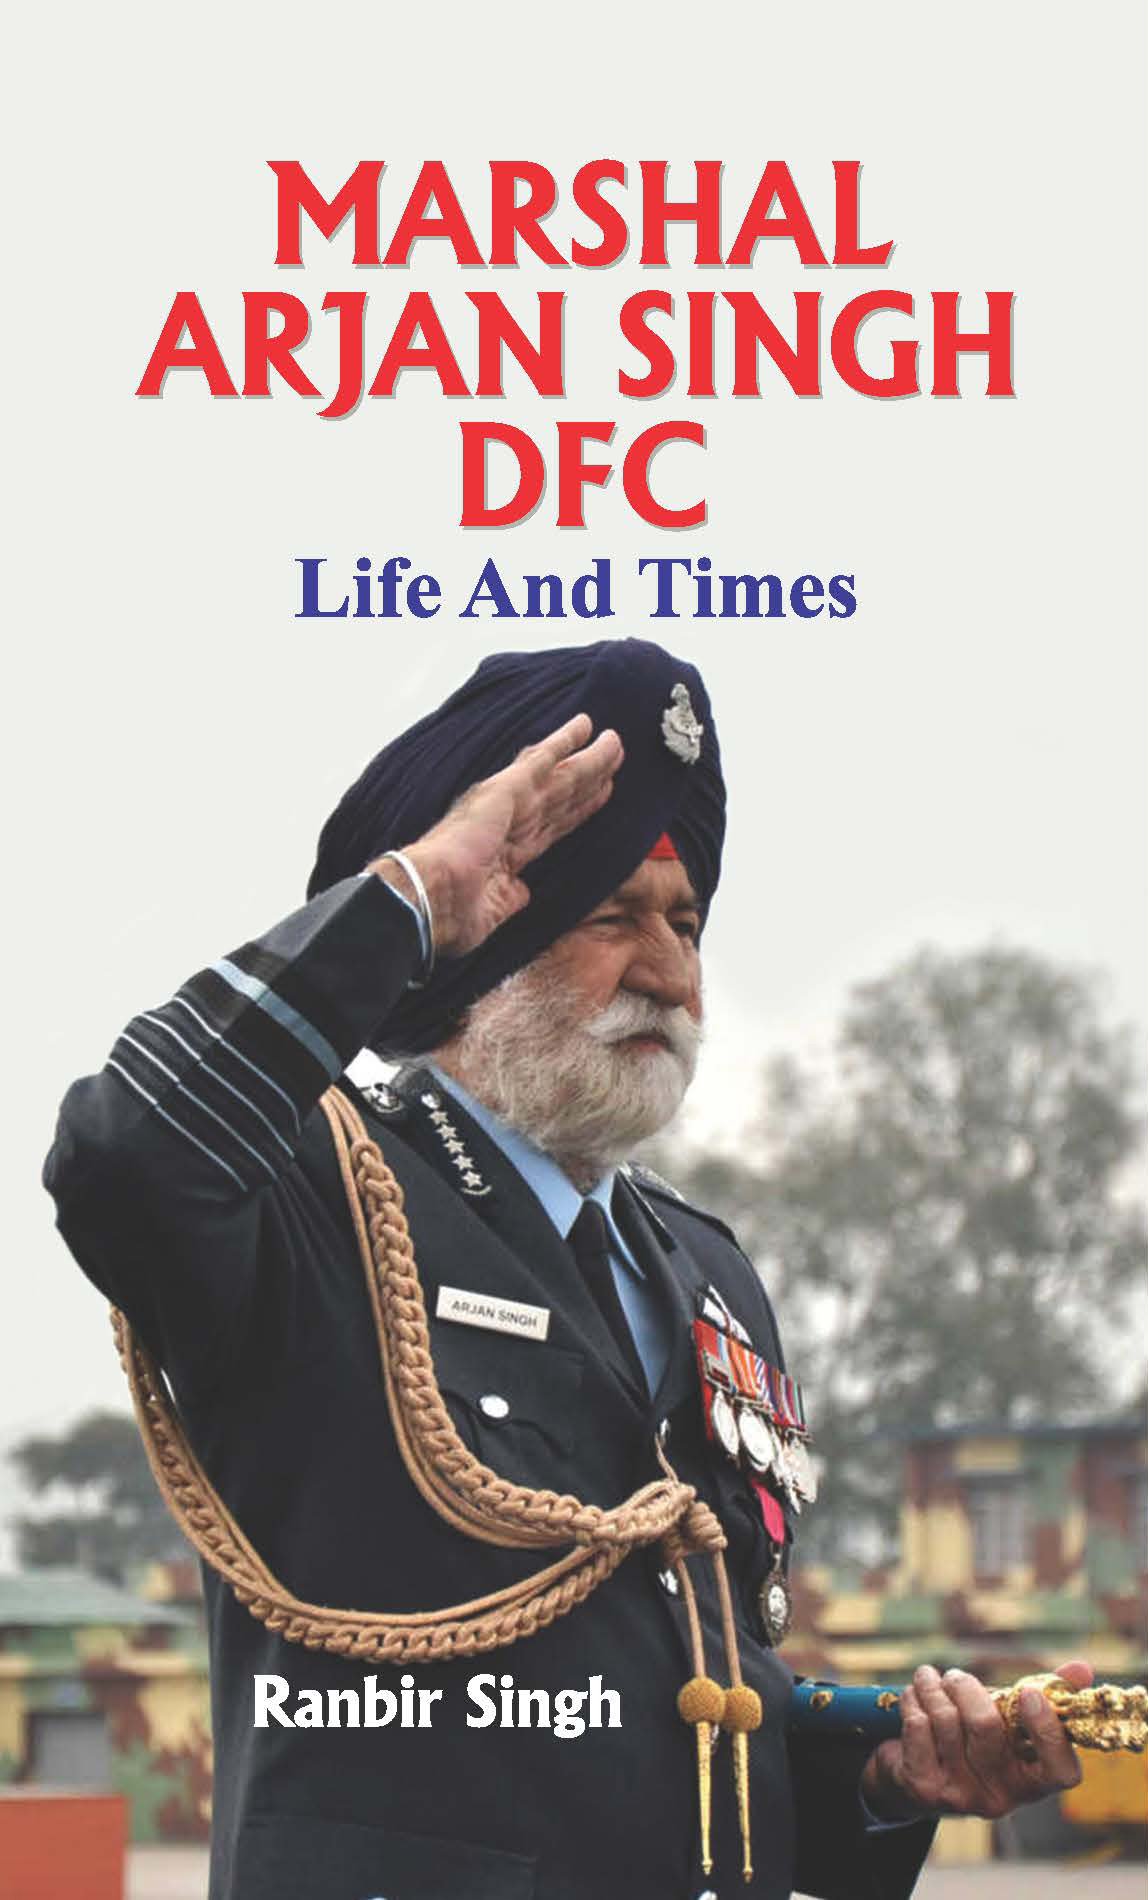 Marshal Arjan Singh DFC : Life And Times